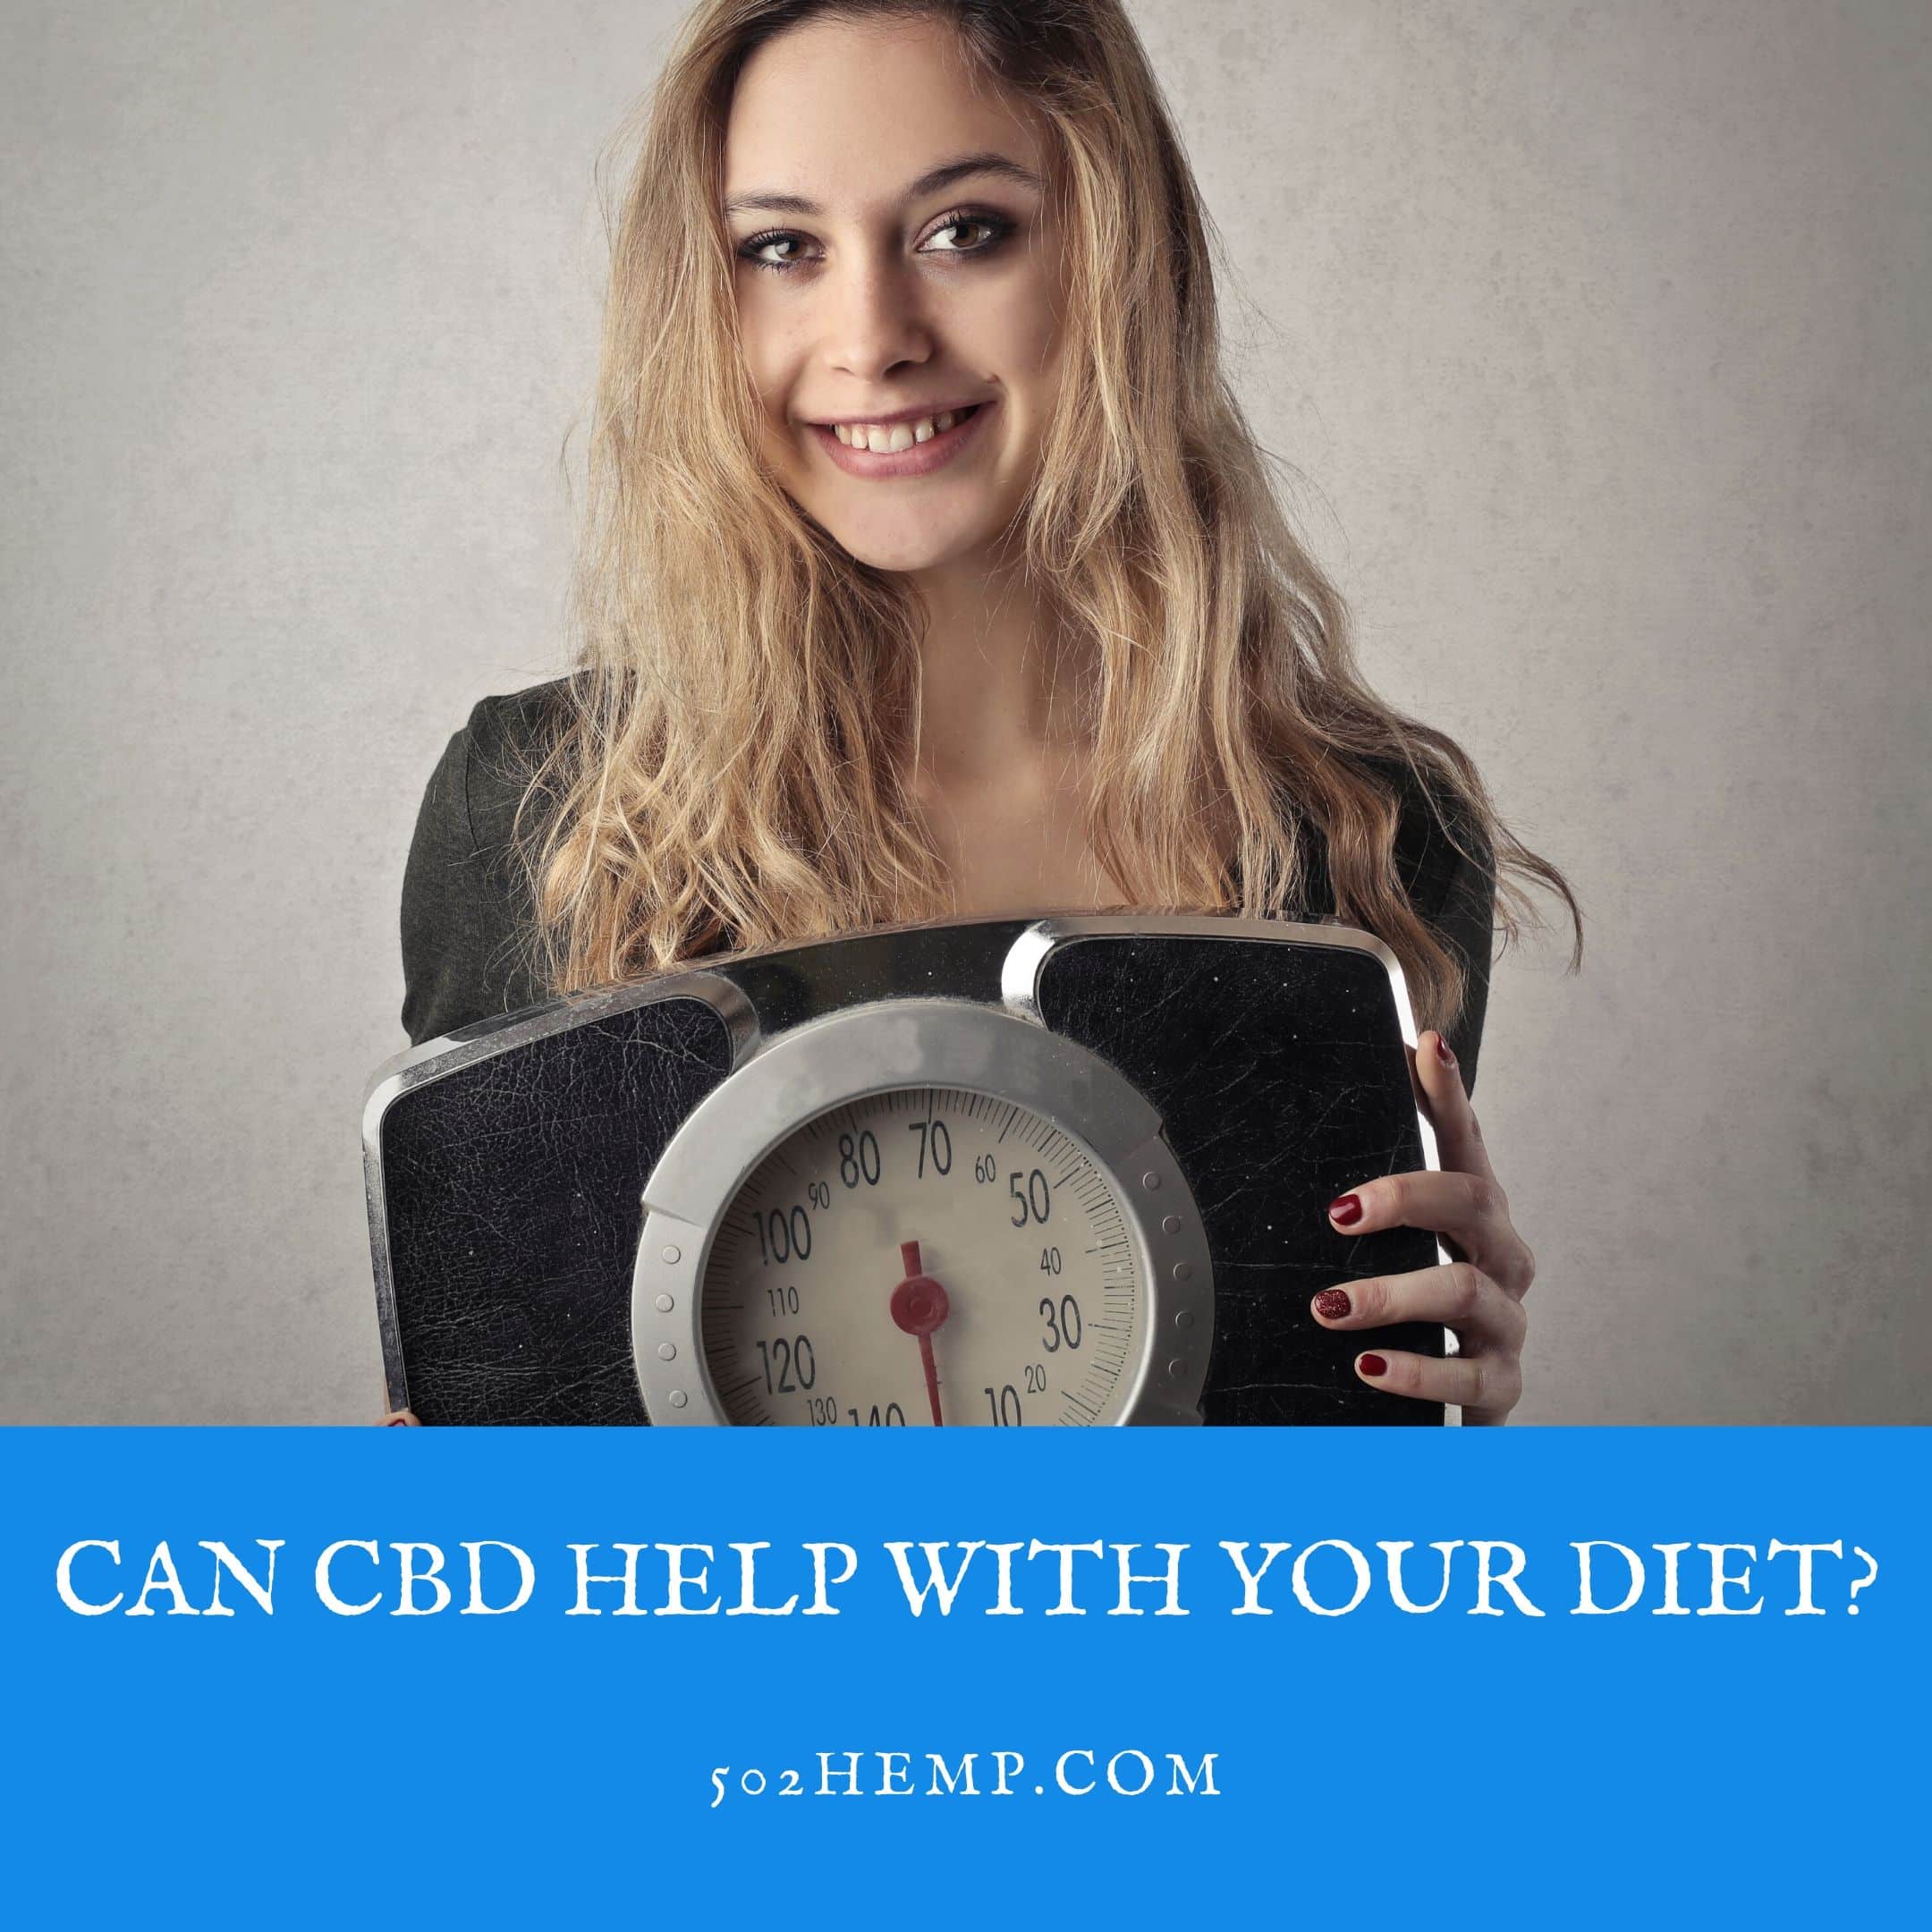 Does CBD Help with Your Diet?